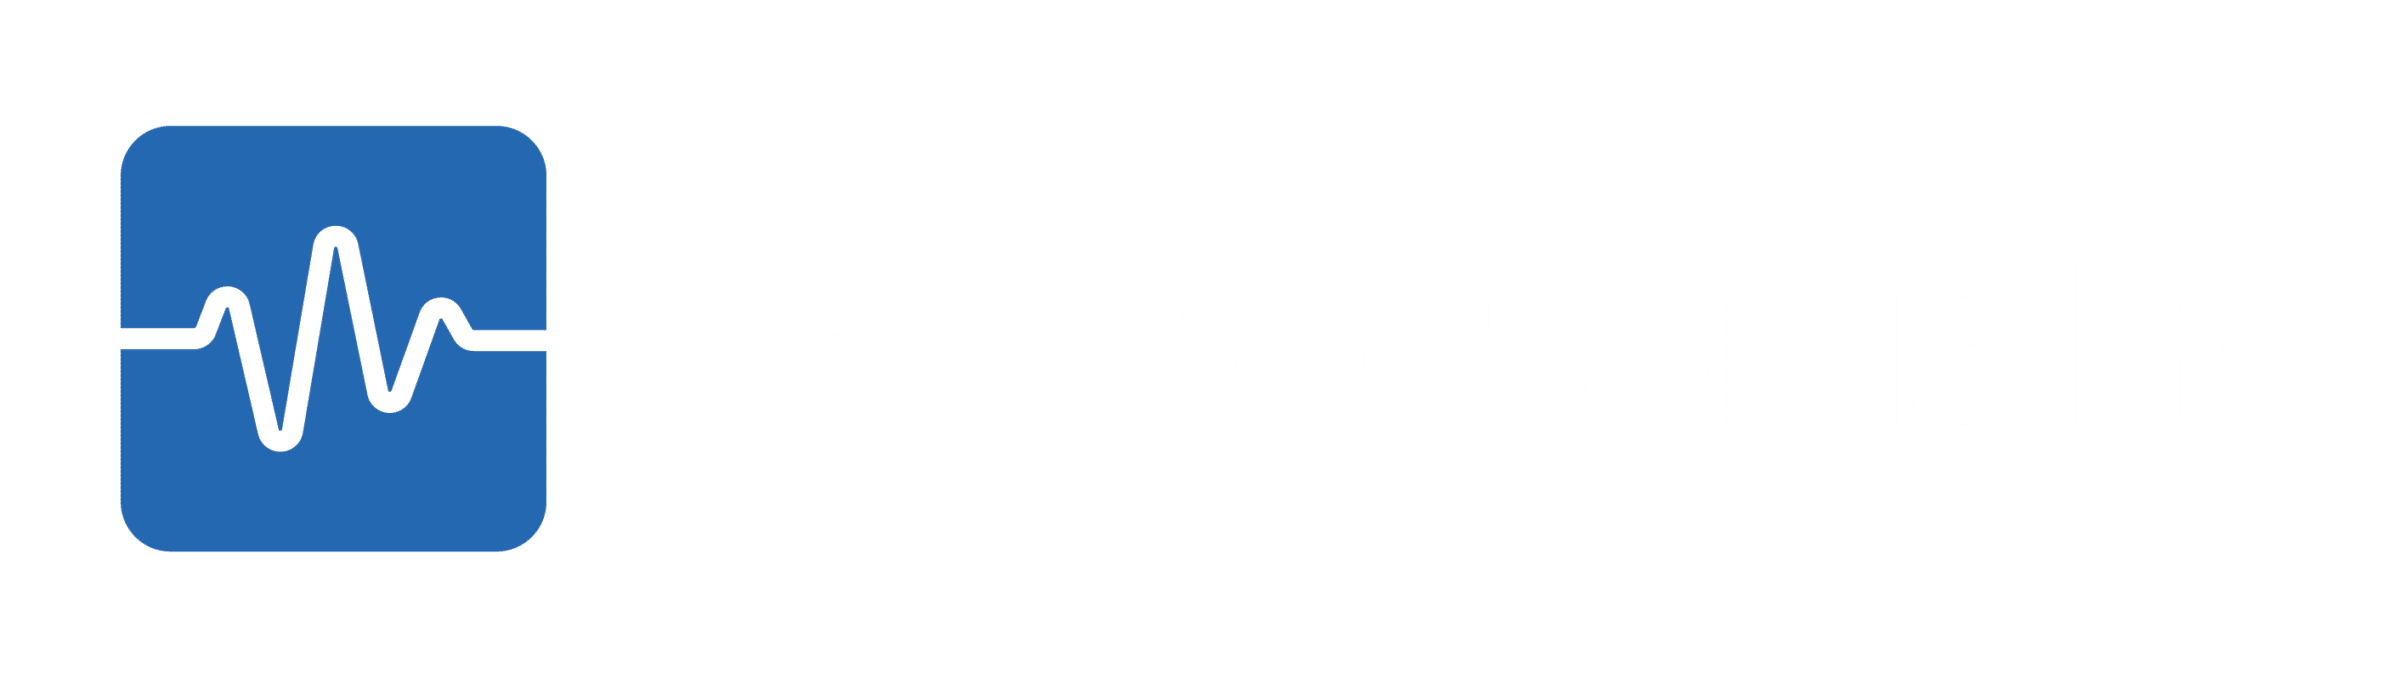 The Doctor is In - LinkedIn